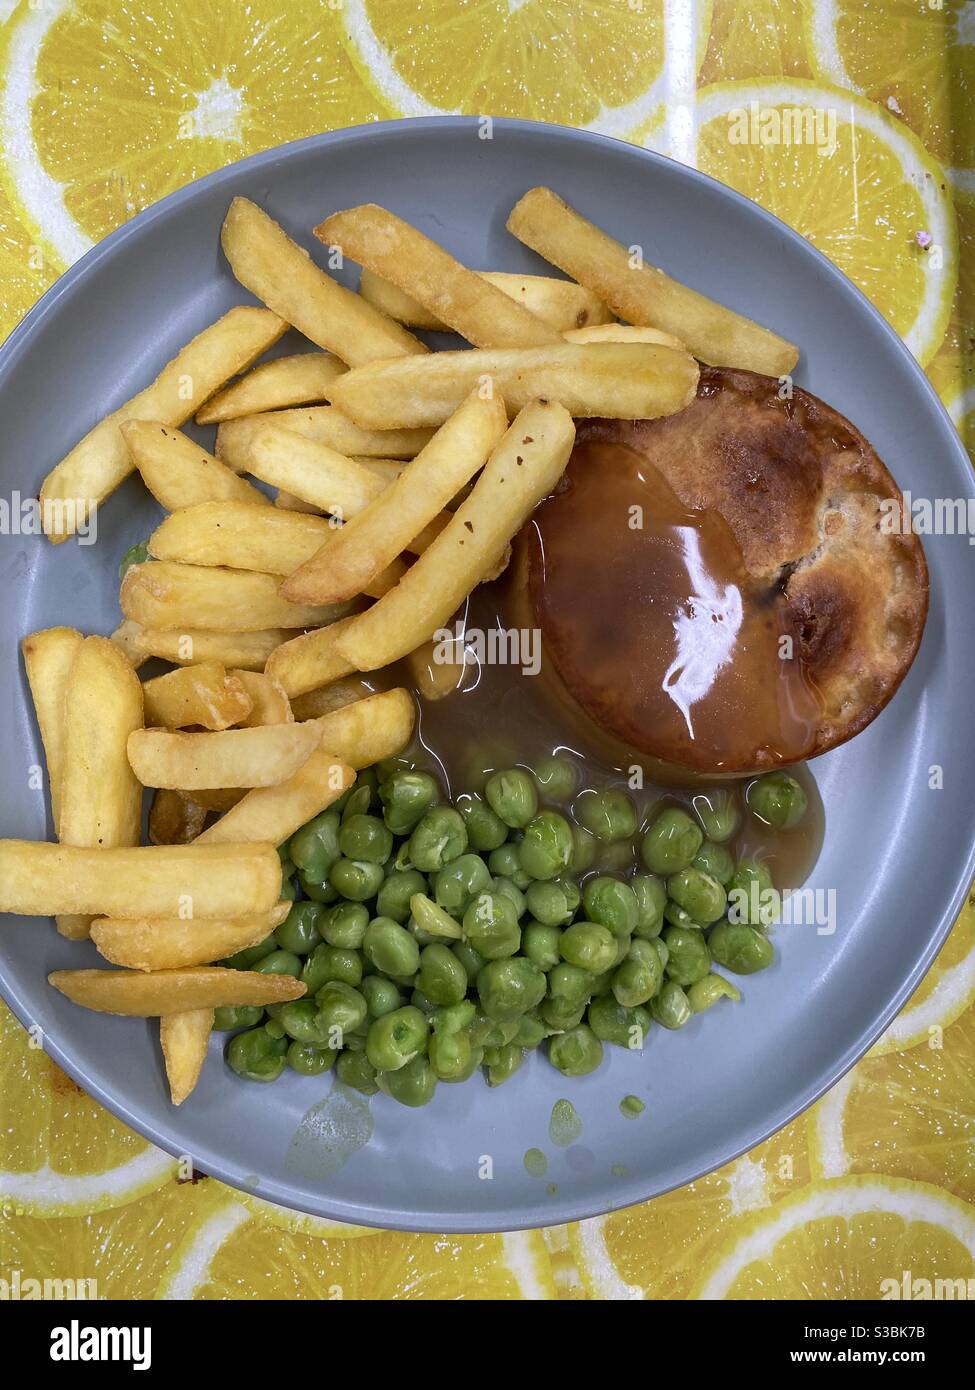 Friday Pie Chips and peas and Gravy Stock Photo